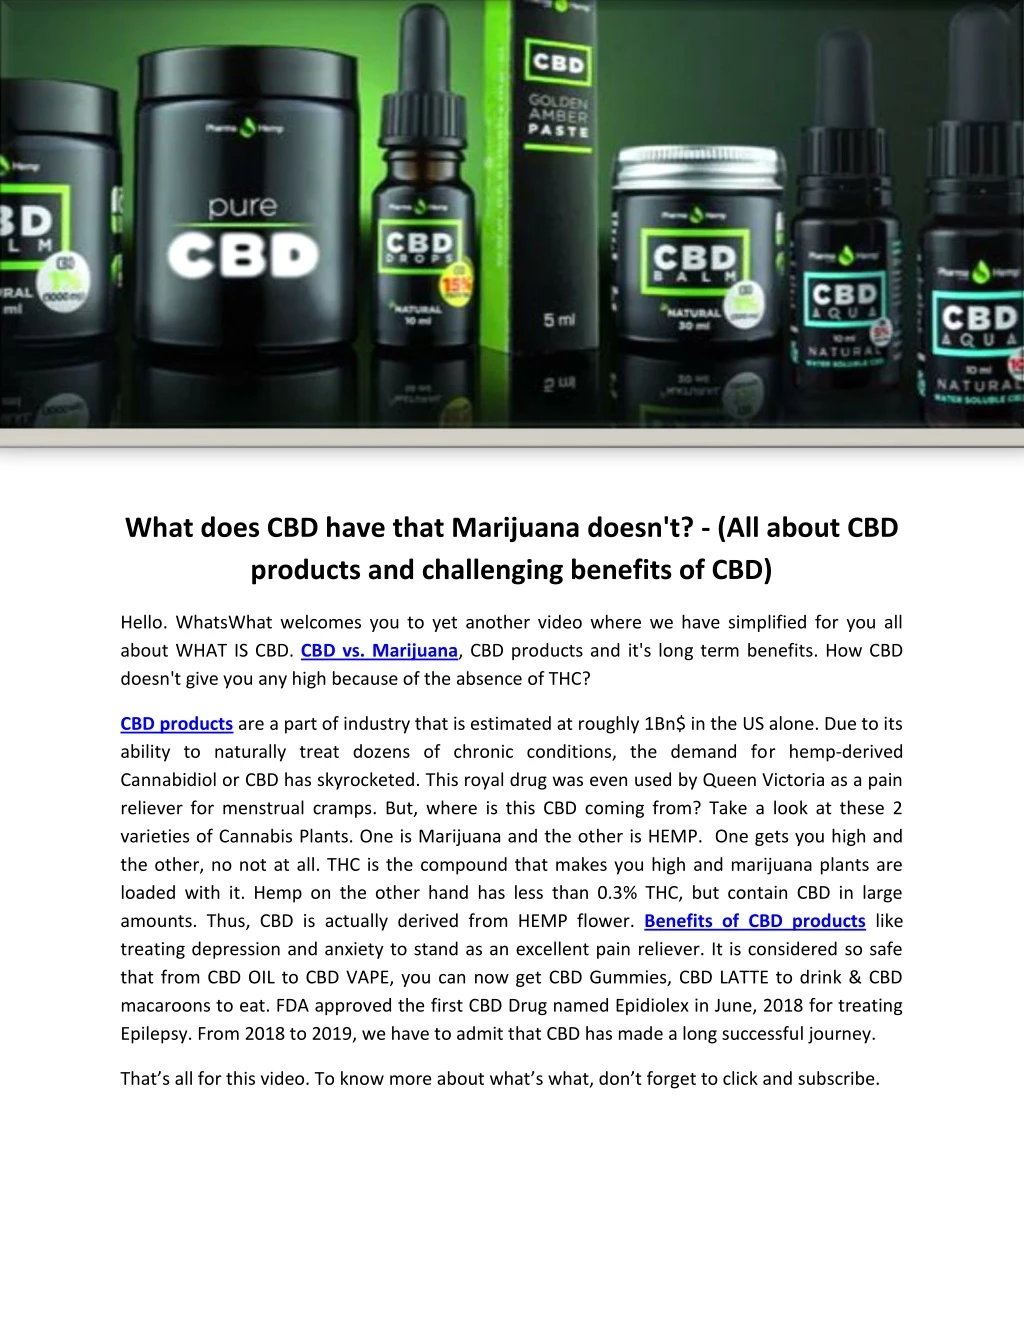 what does cbd have that marijuana doesn